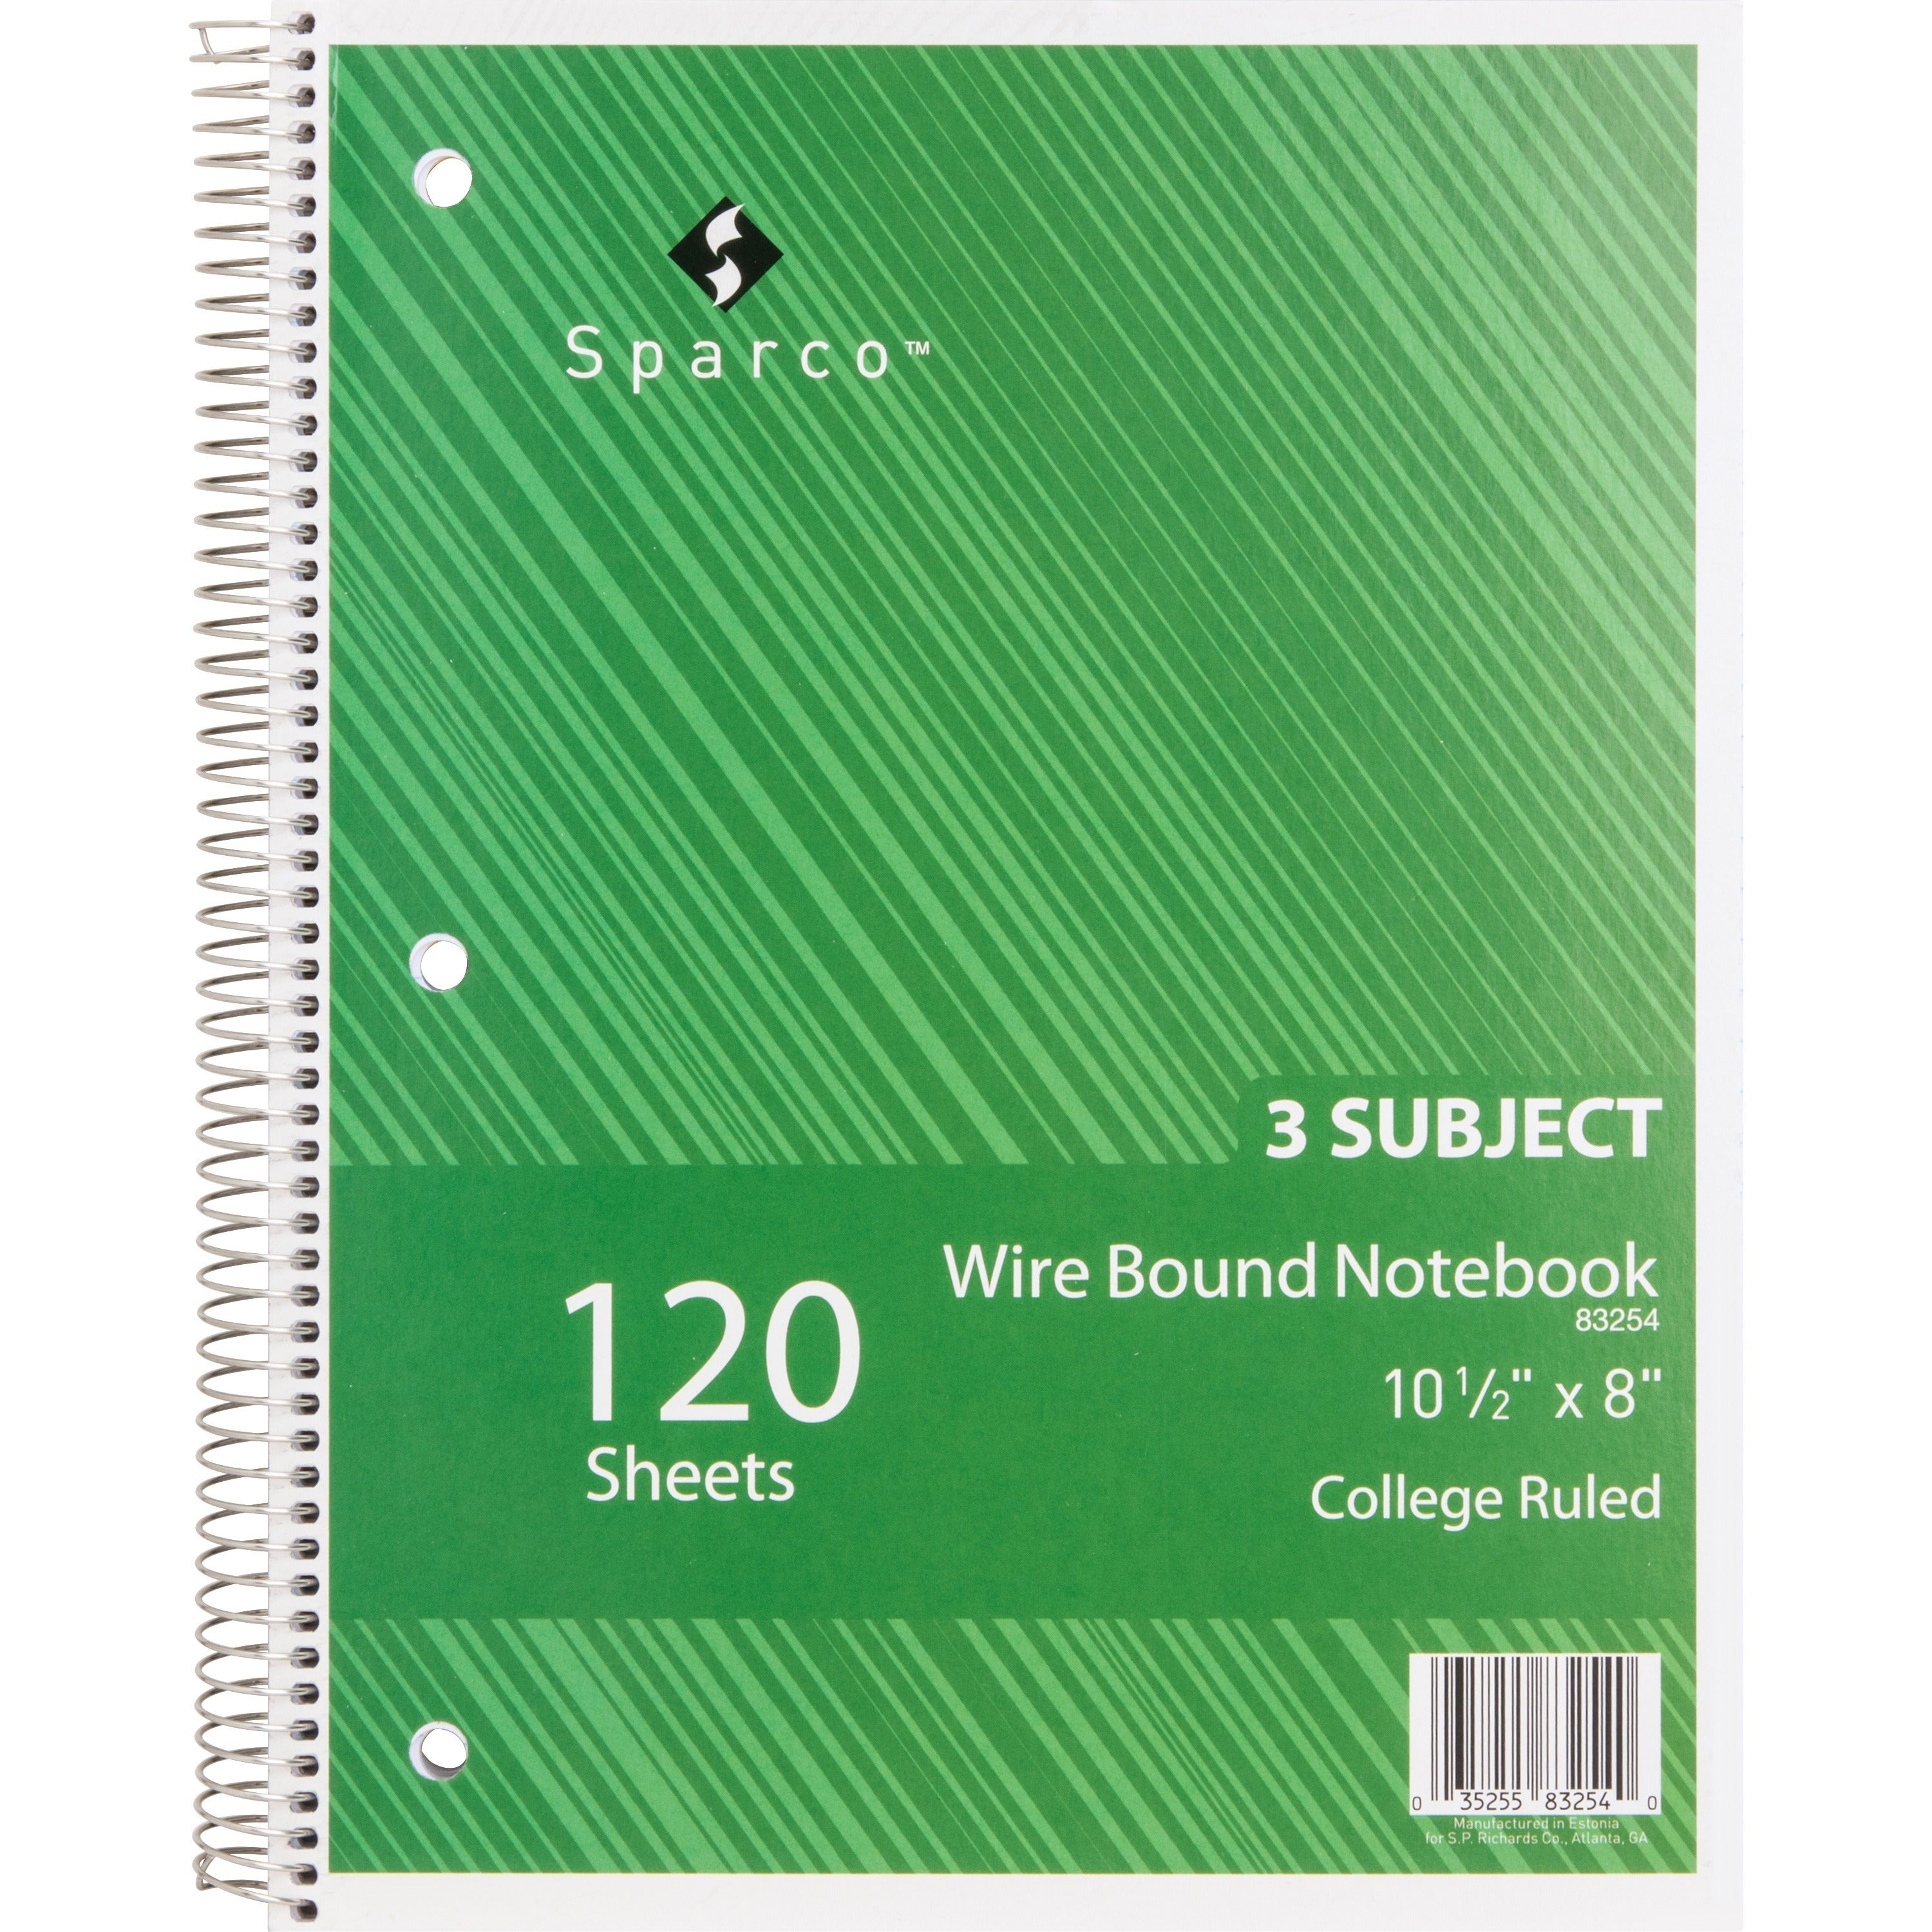 sparco-wire-bound-college-ruled-notebook-120-sheets-wire-bound-college-ruled-unruled-margin-16-lb-basis-weight-8-x-10-1-2-assorted-paper-assortedchipboard-cover-resist-bleed-through-subject-stiff-cover-stiff-back-6-bundle_spr83254bd - 2